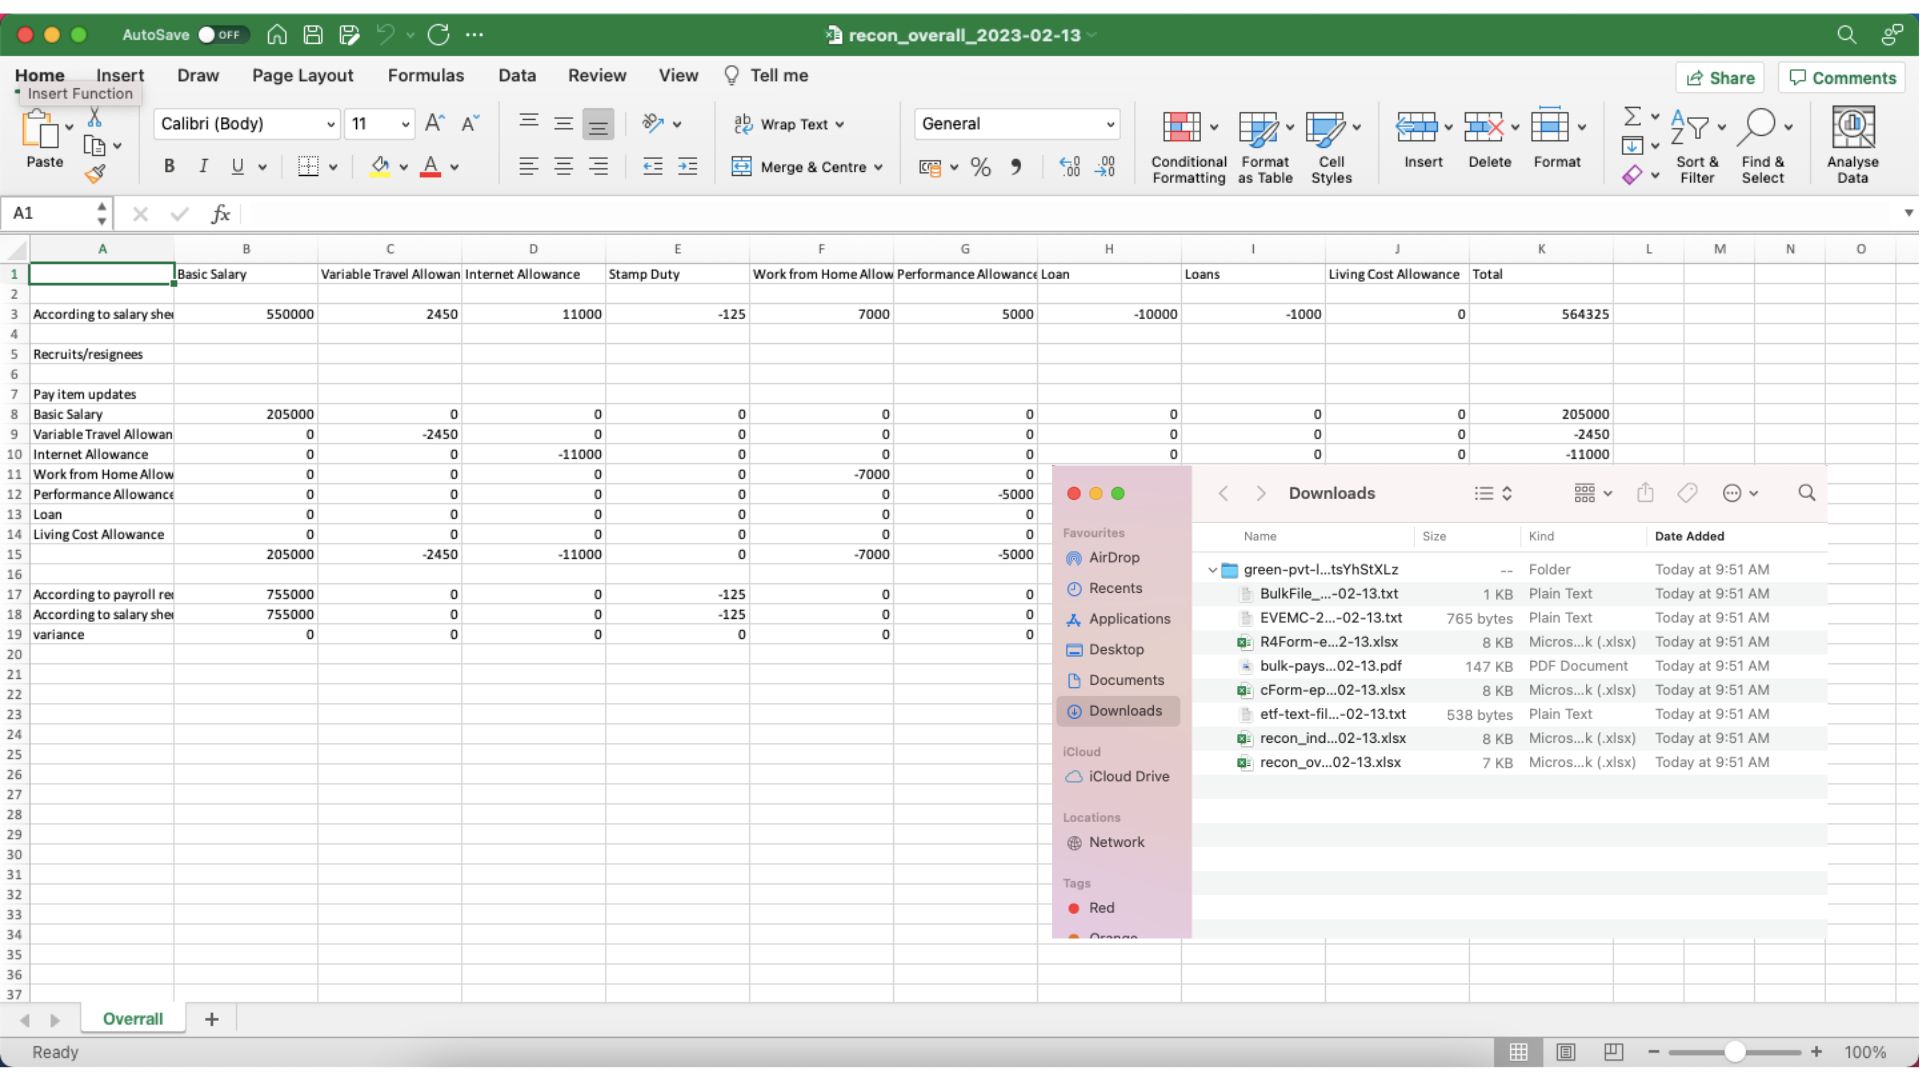 A screenshot of a payroll reconciliation report generated through Humanised Payroll